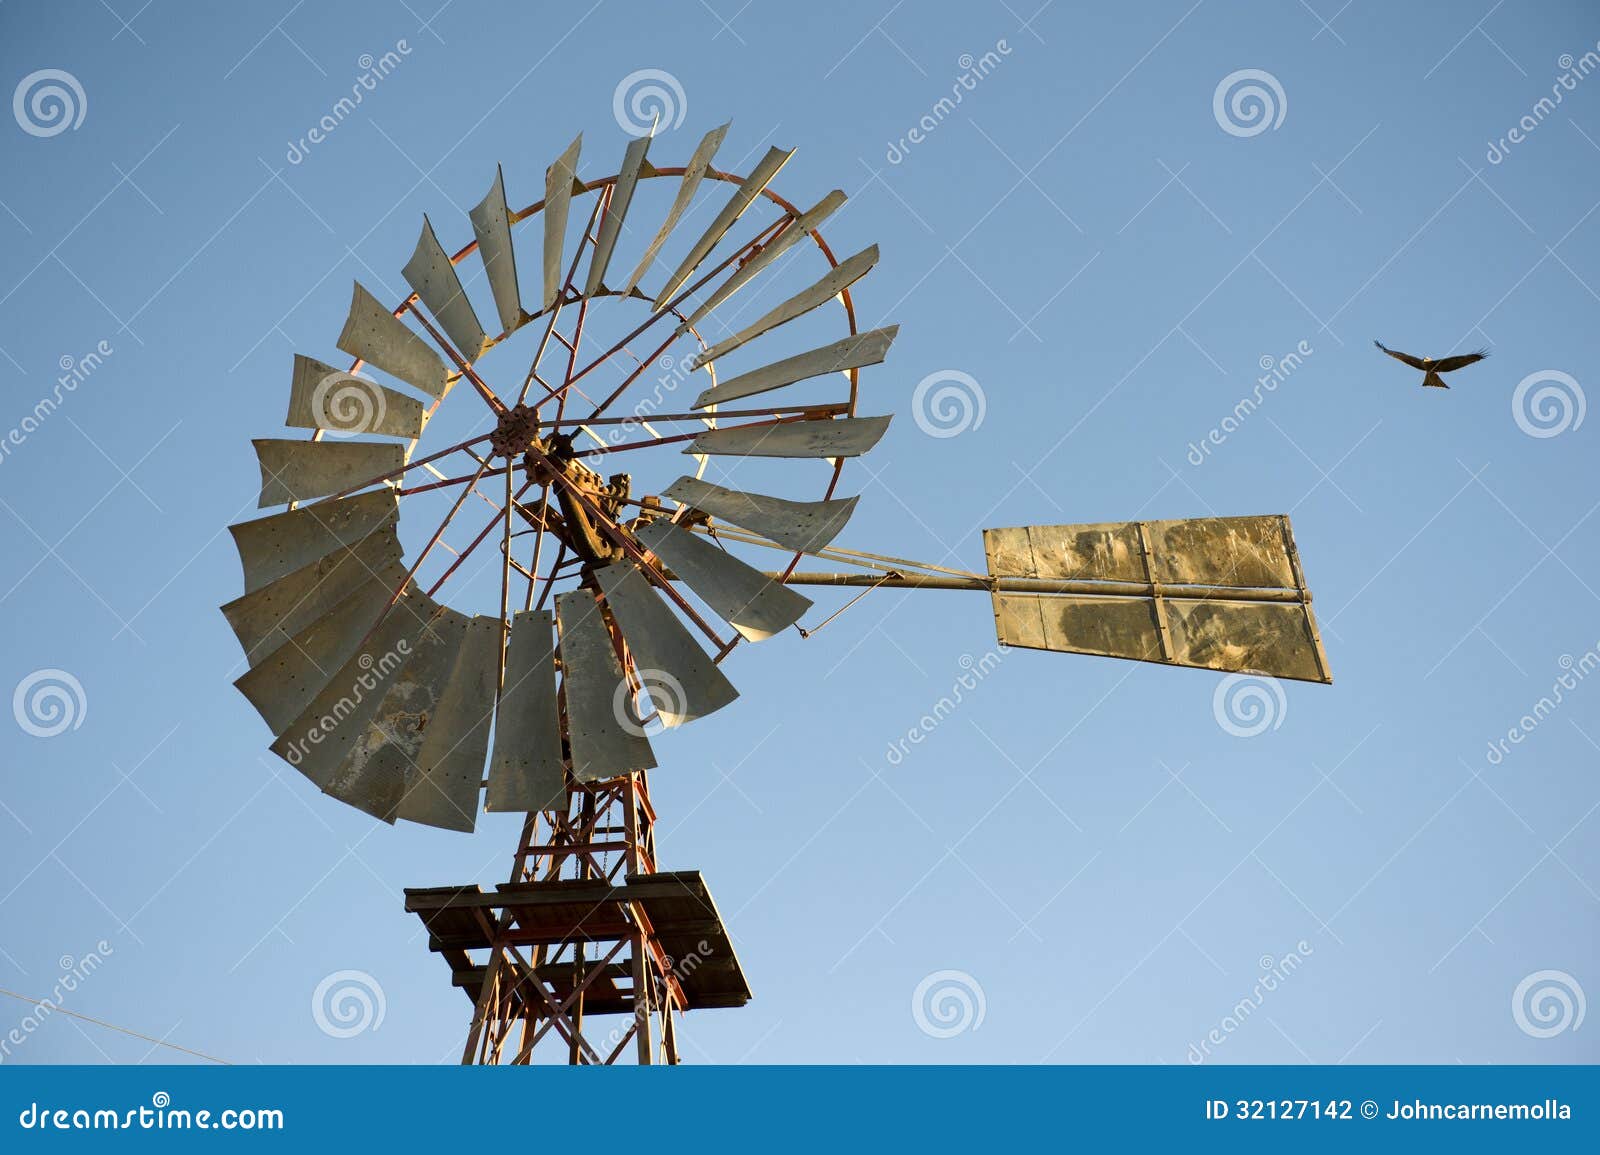 Windmill in outback Queensland, Australia.